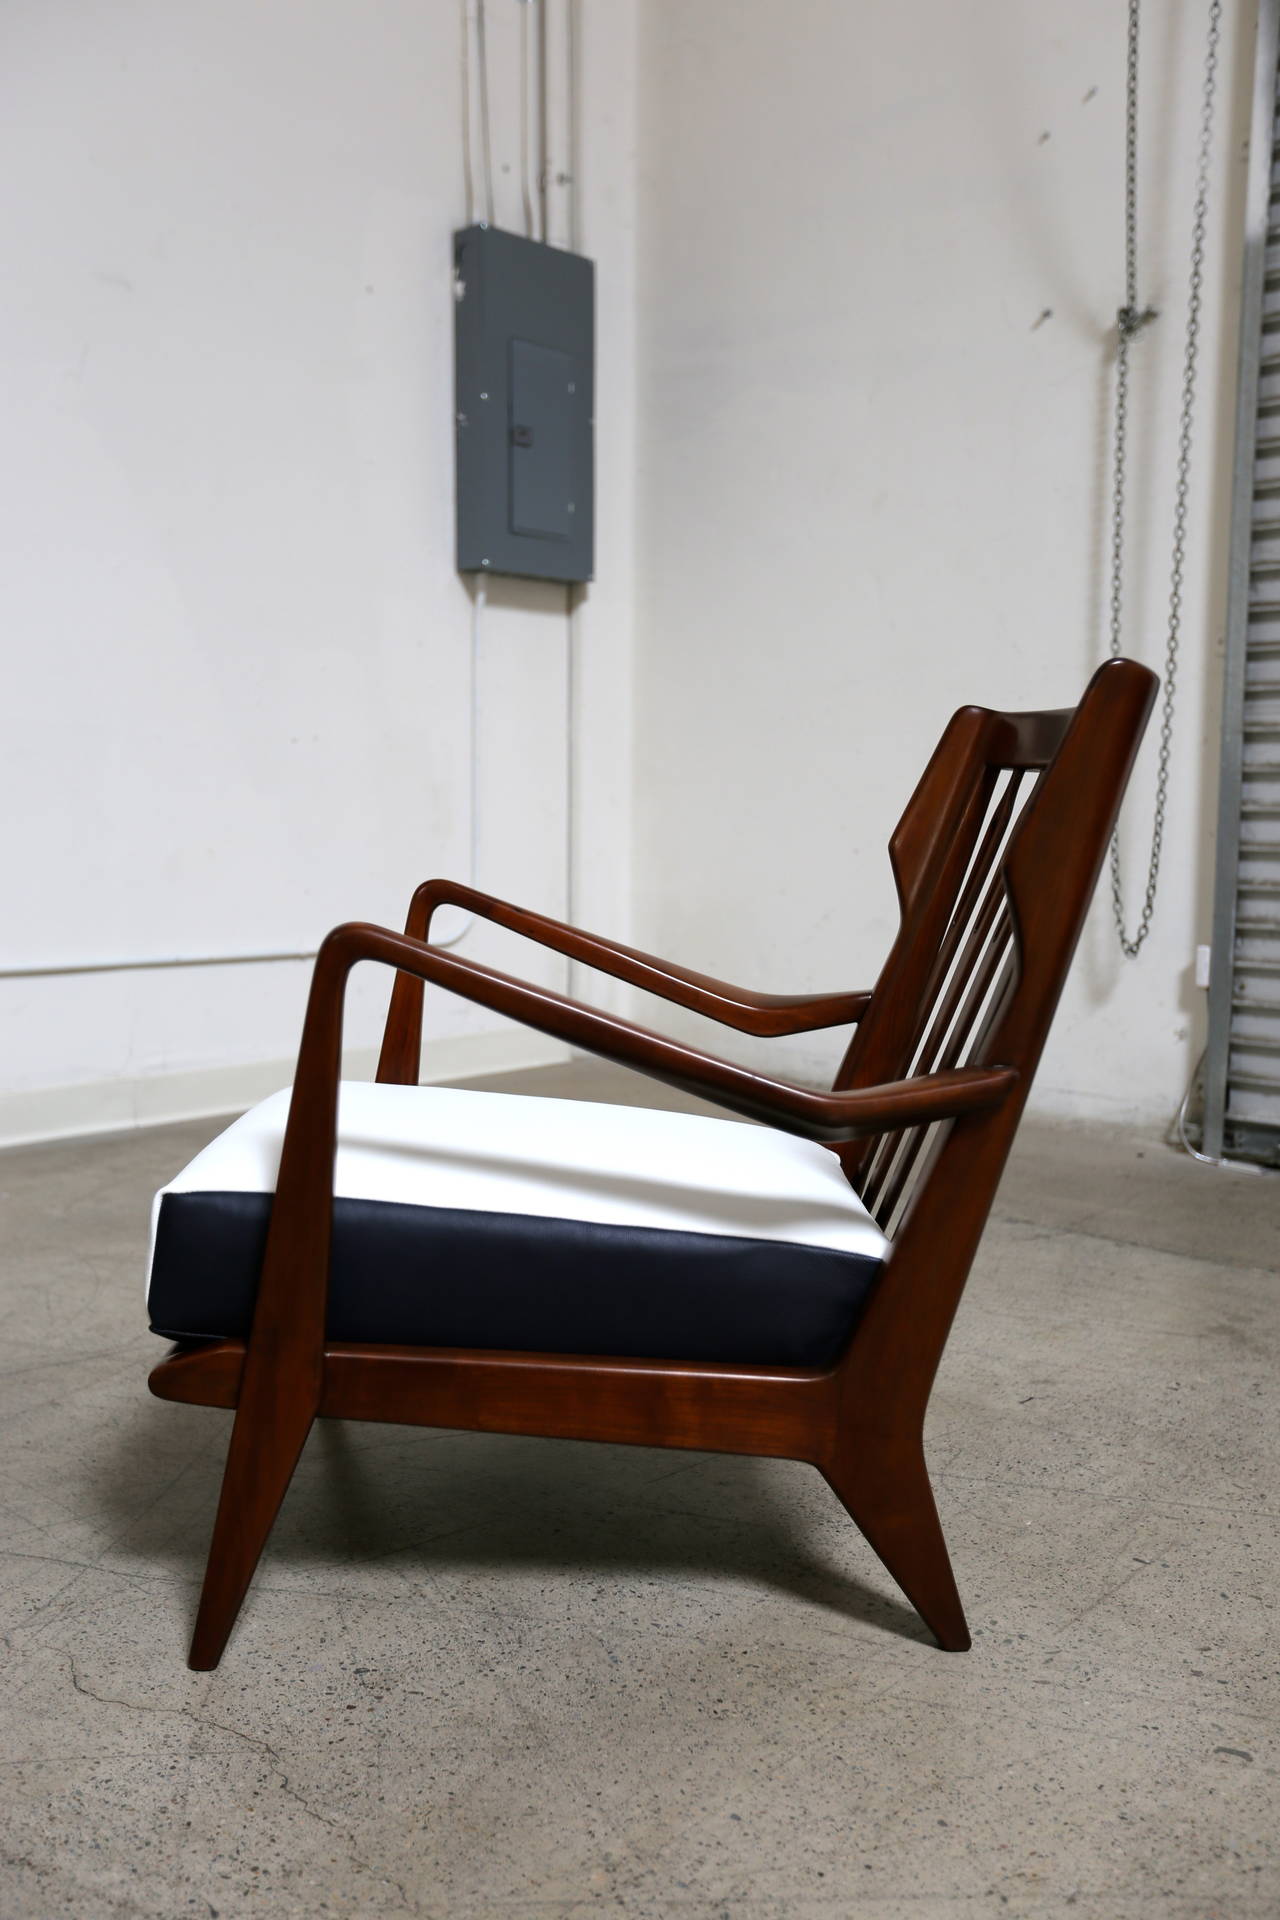 Leather Pair of Lounge Chairs by Gio Ponti Model No. 516, circa 1955